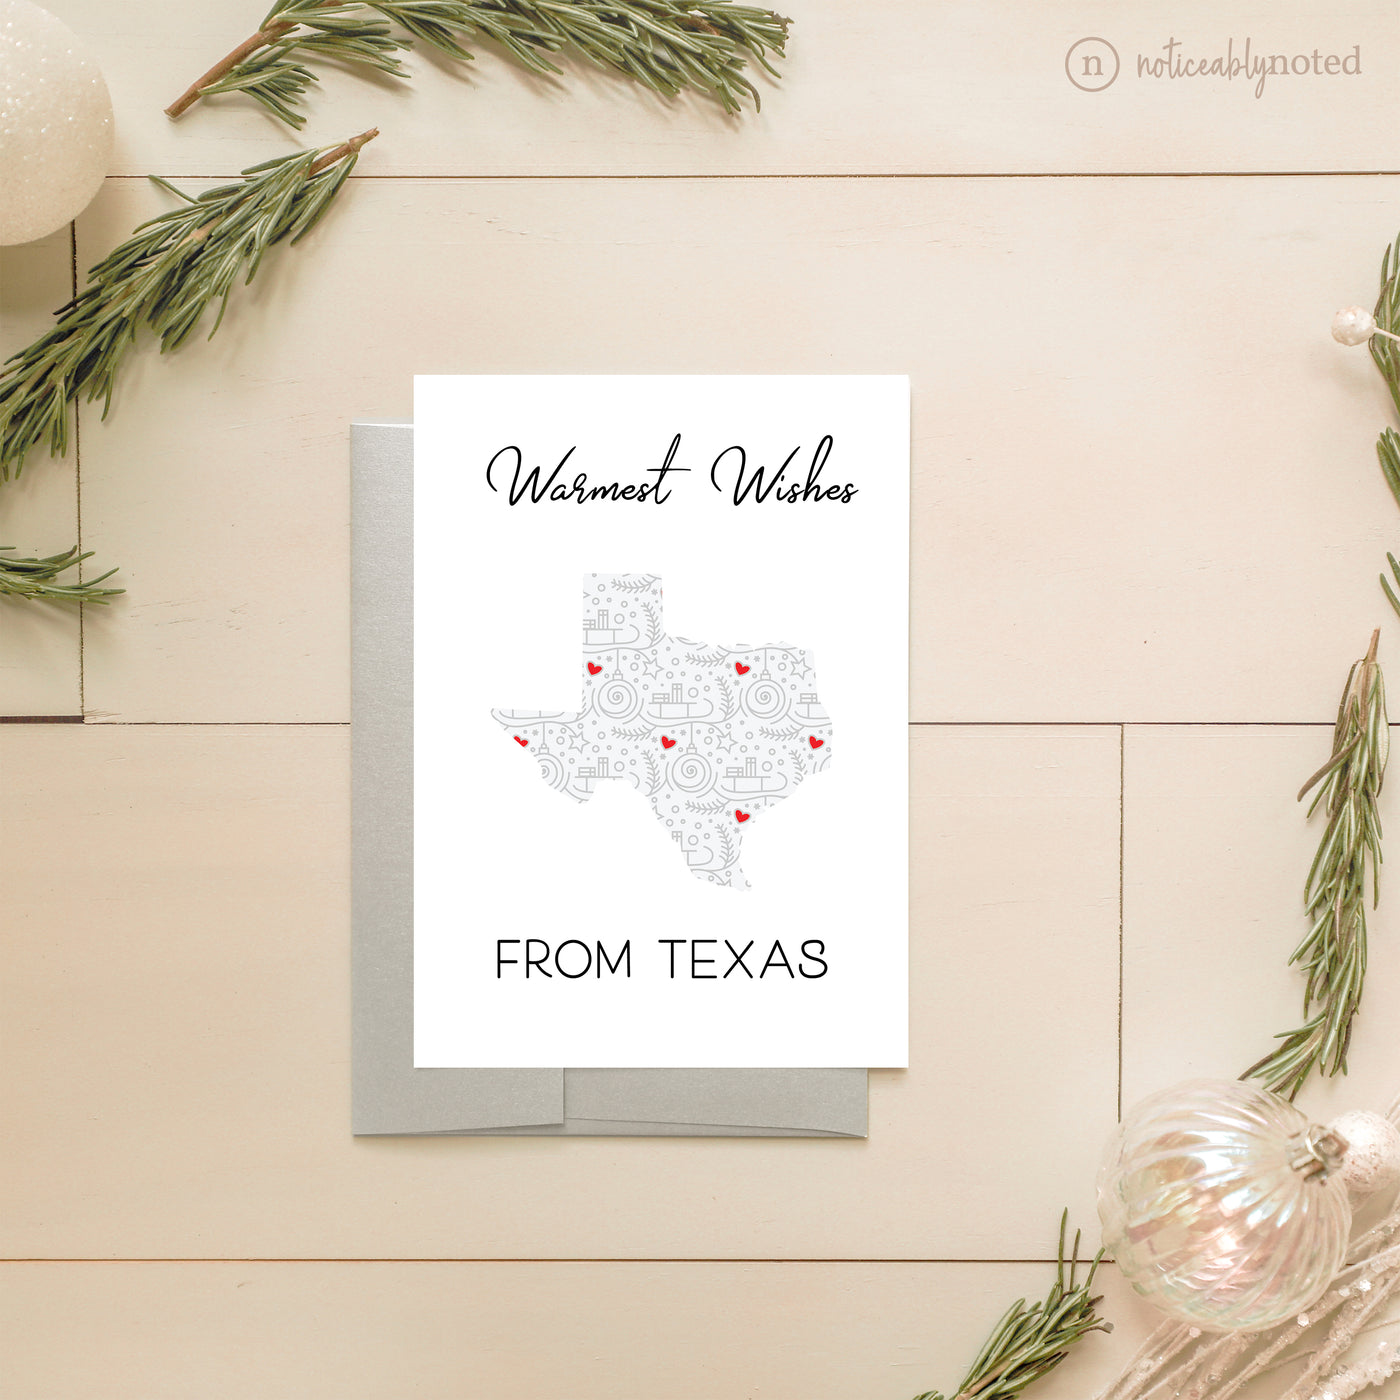 Texas Christmas Card - Warmest Wishes | Noticeably Noted